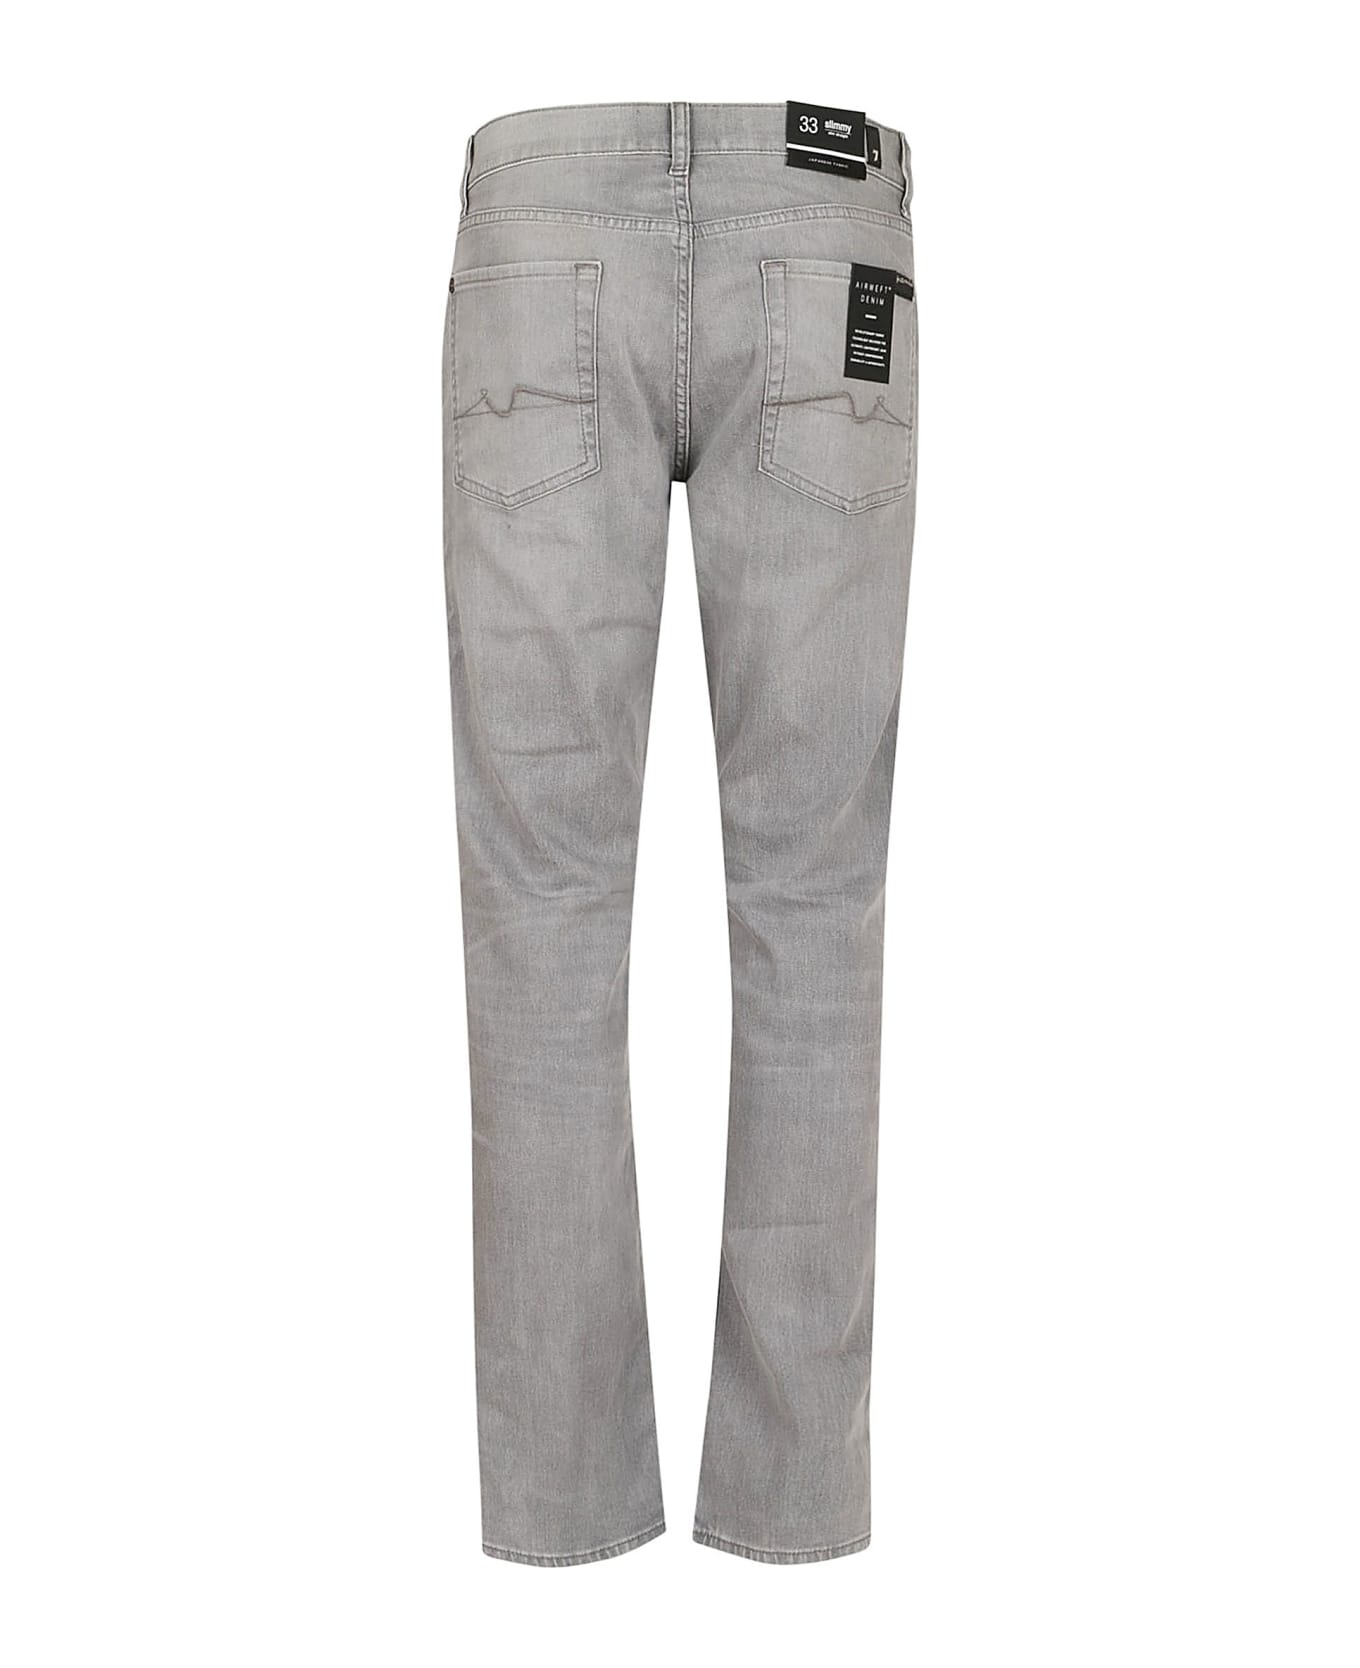 7 For All Mankind Slimmy Advance - Grey